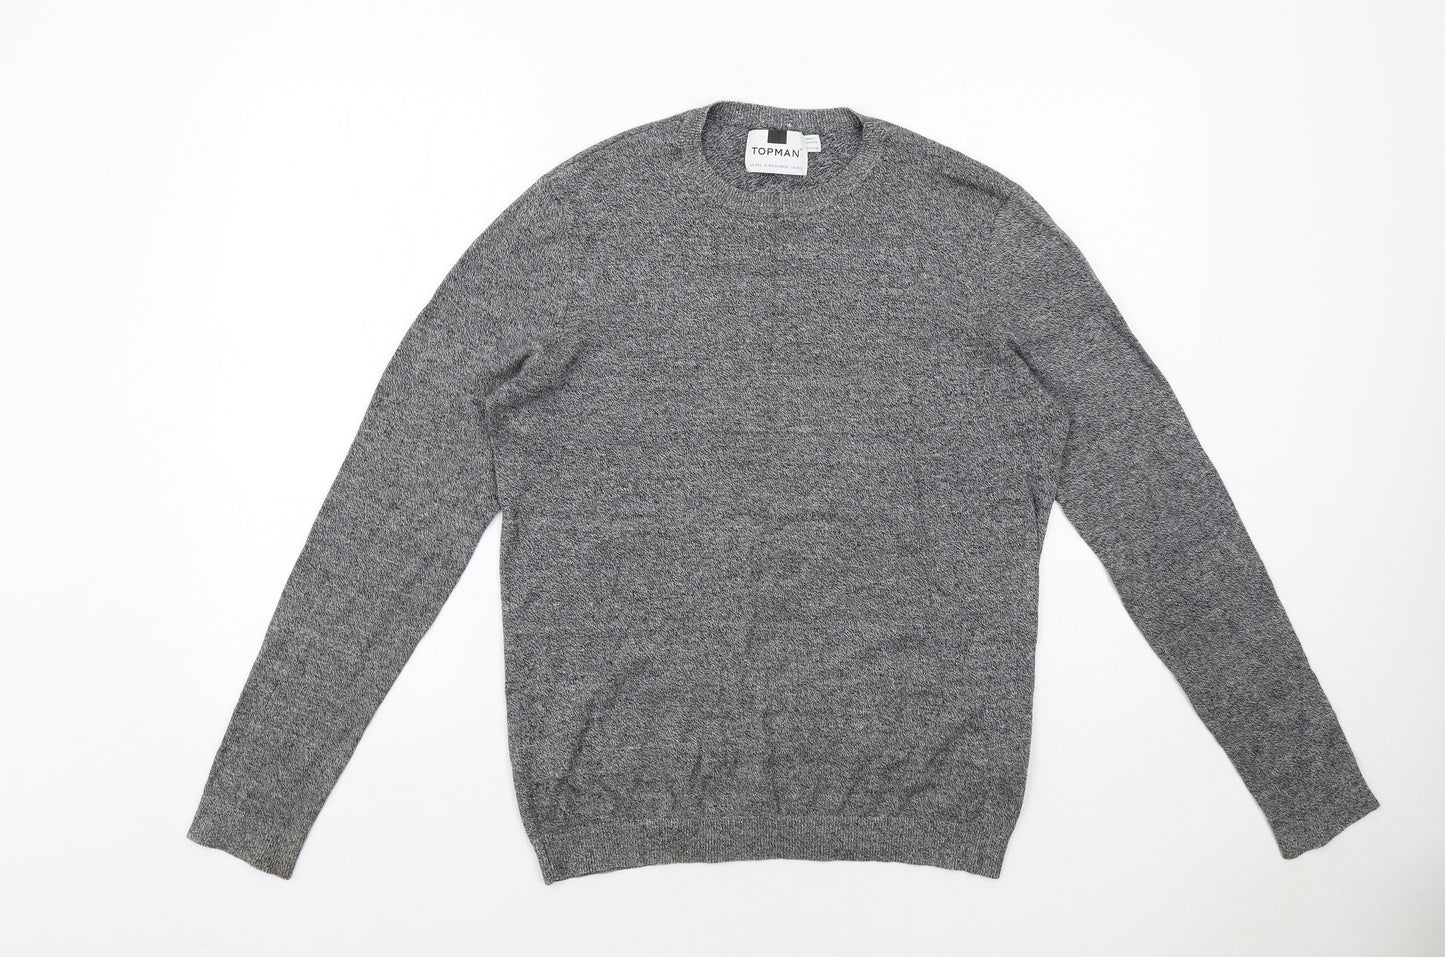 Topman Mens Grey Round Neck Cotton Pullover Jumper Size 2XL Long Sleeve